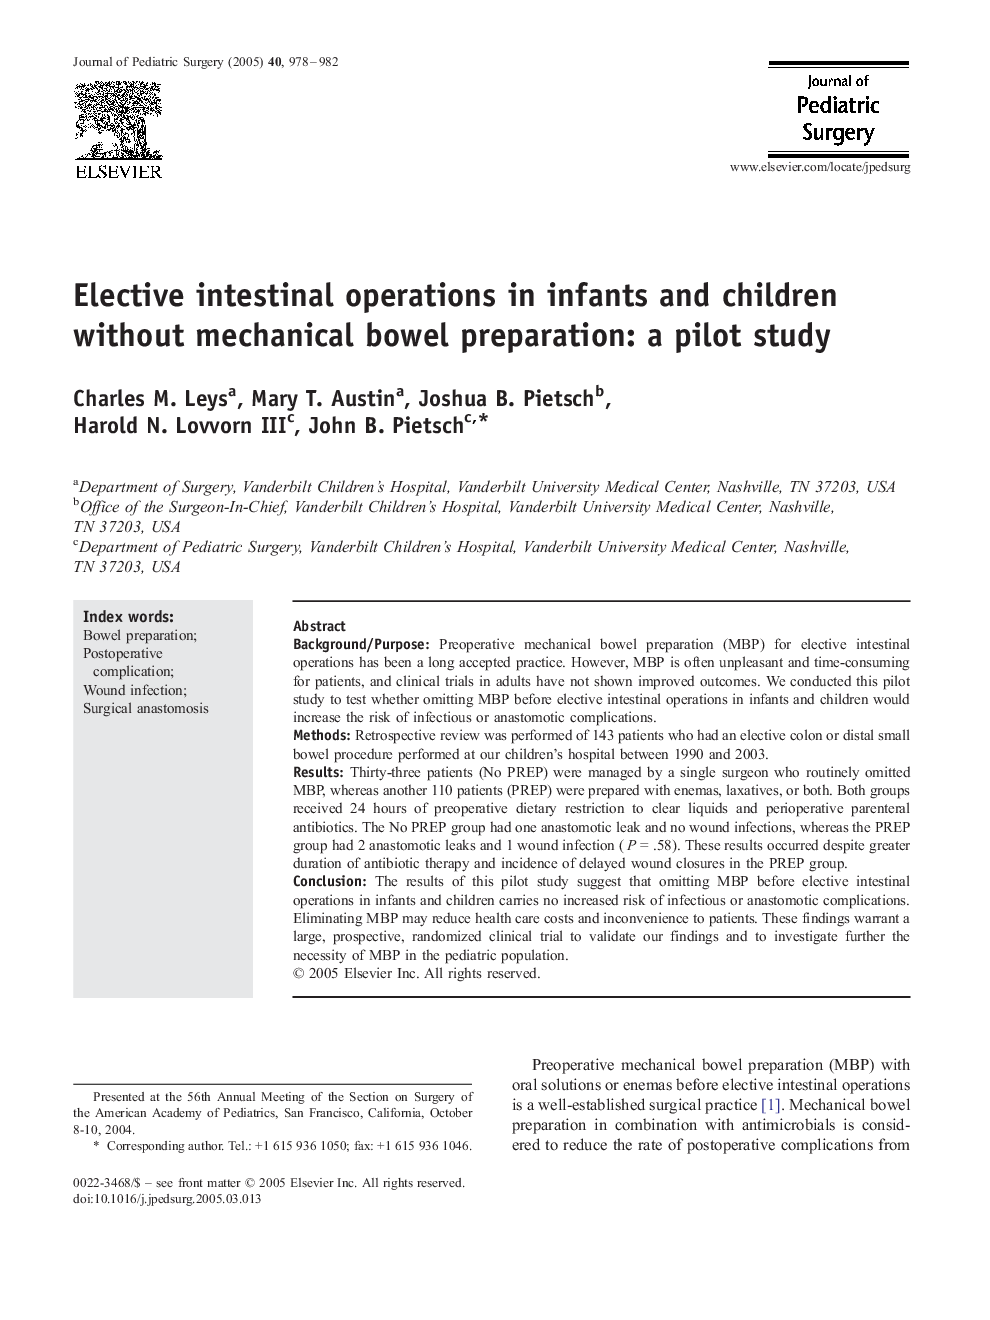 Elective intestinal operations in infants and children without mechanical bowel preparation: a pilot study